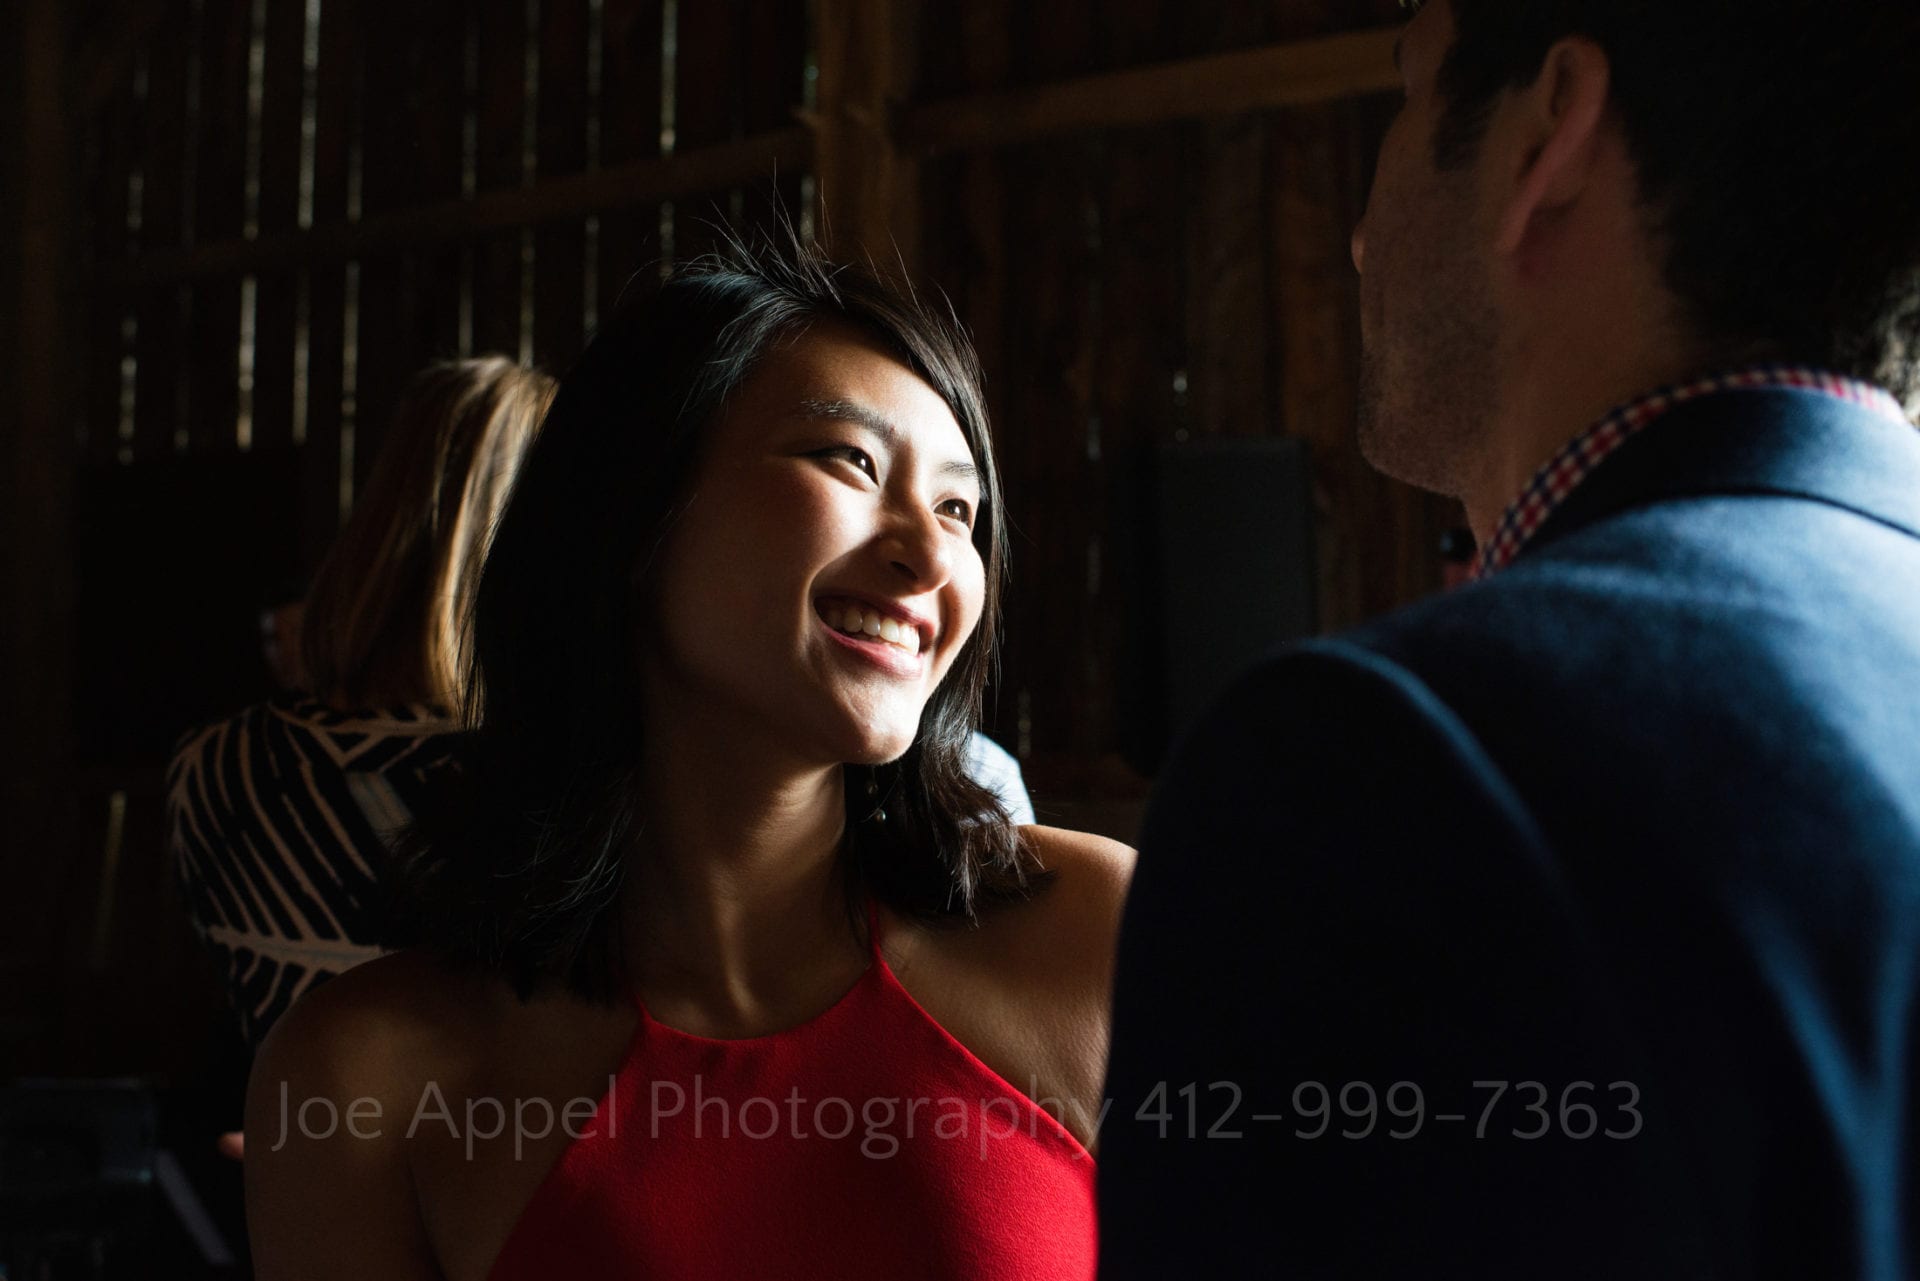 A beautiful asian woman smiles as she dances with her date. The sunlight illuminates her face in a pleasing way.